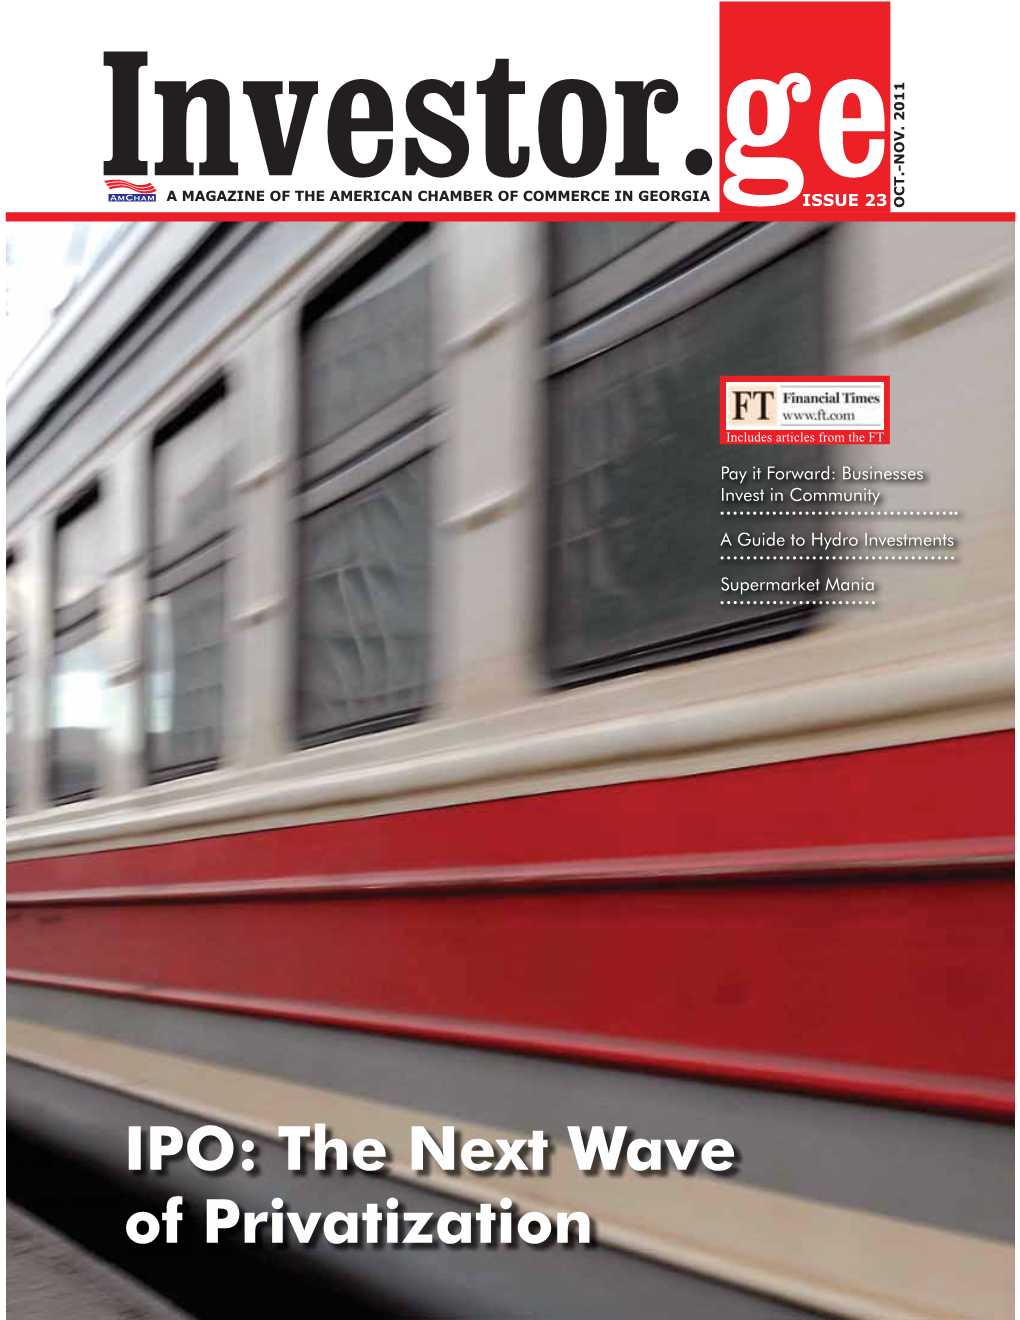 IPO: the Next Wave of Privatization